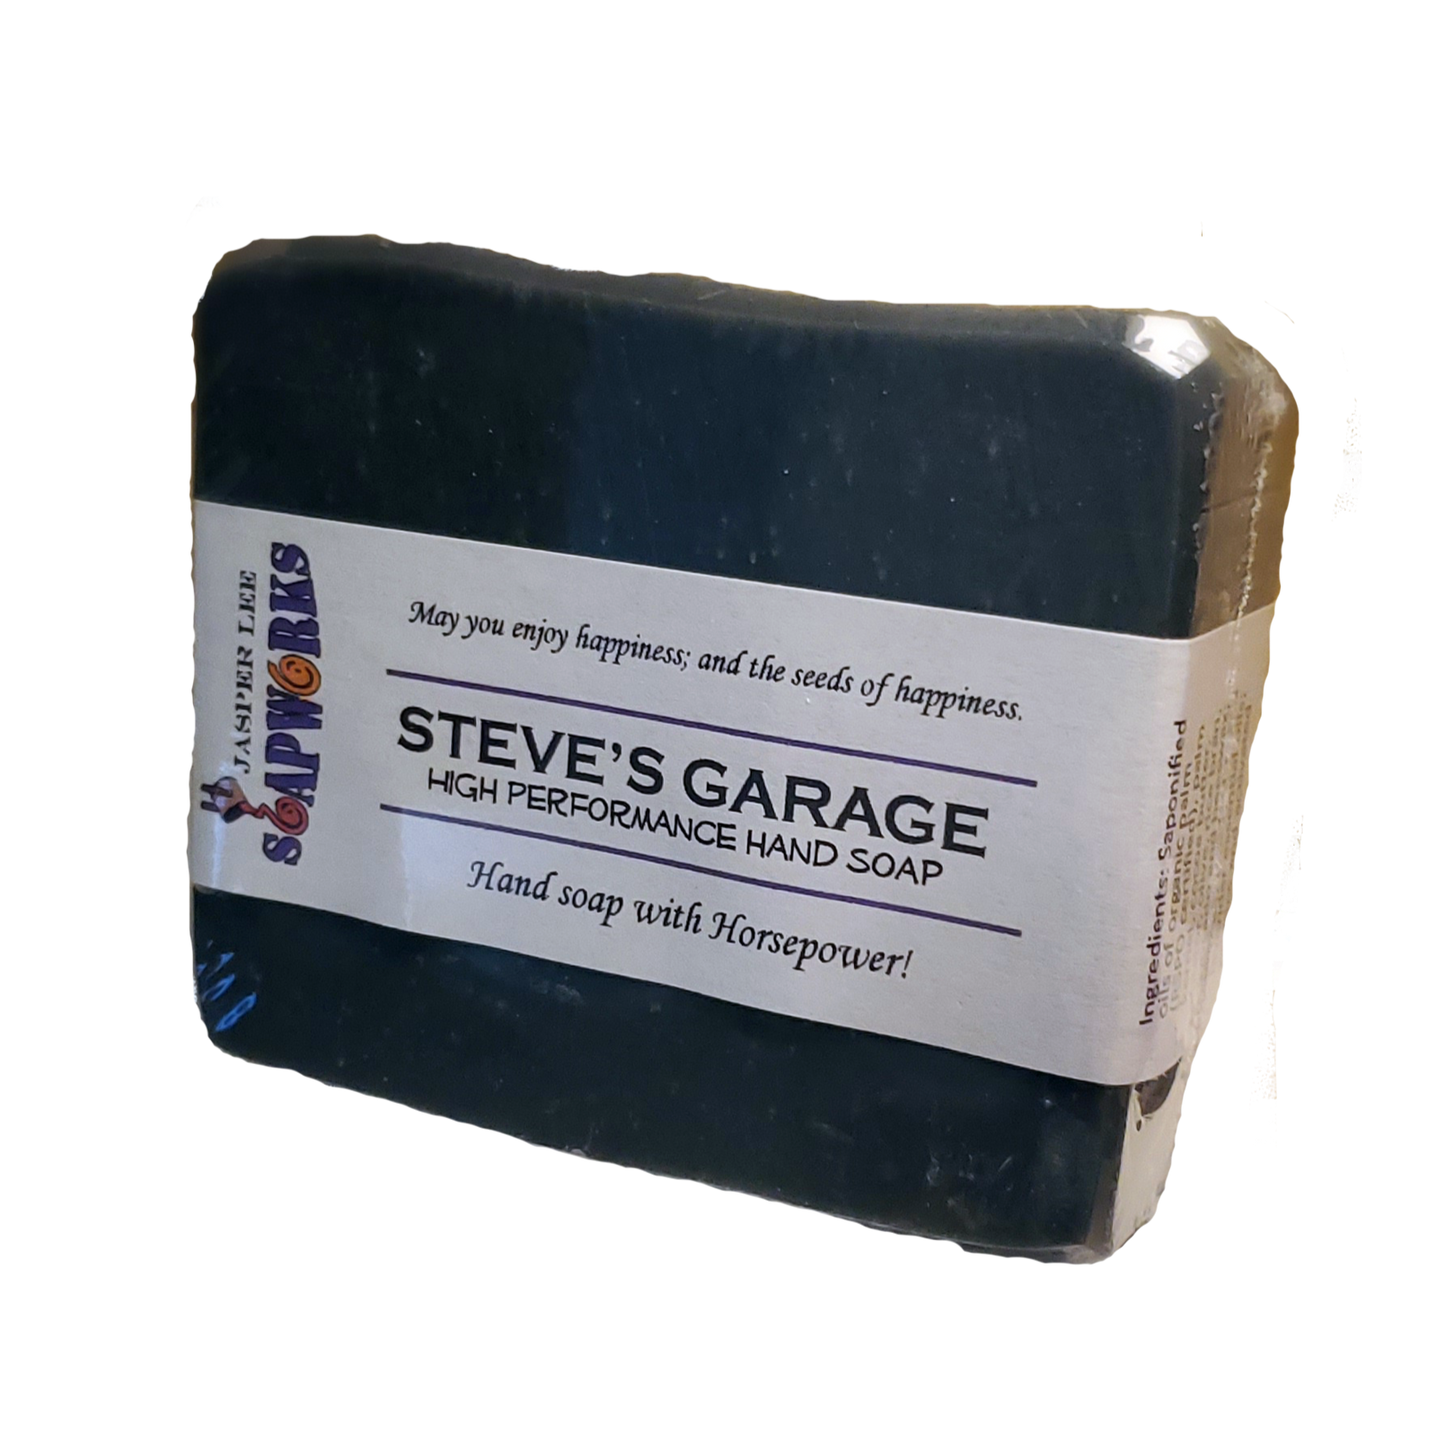 Large rectangular bar of Steve's Garage High Performance hand soap with activated charcoal